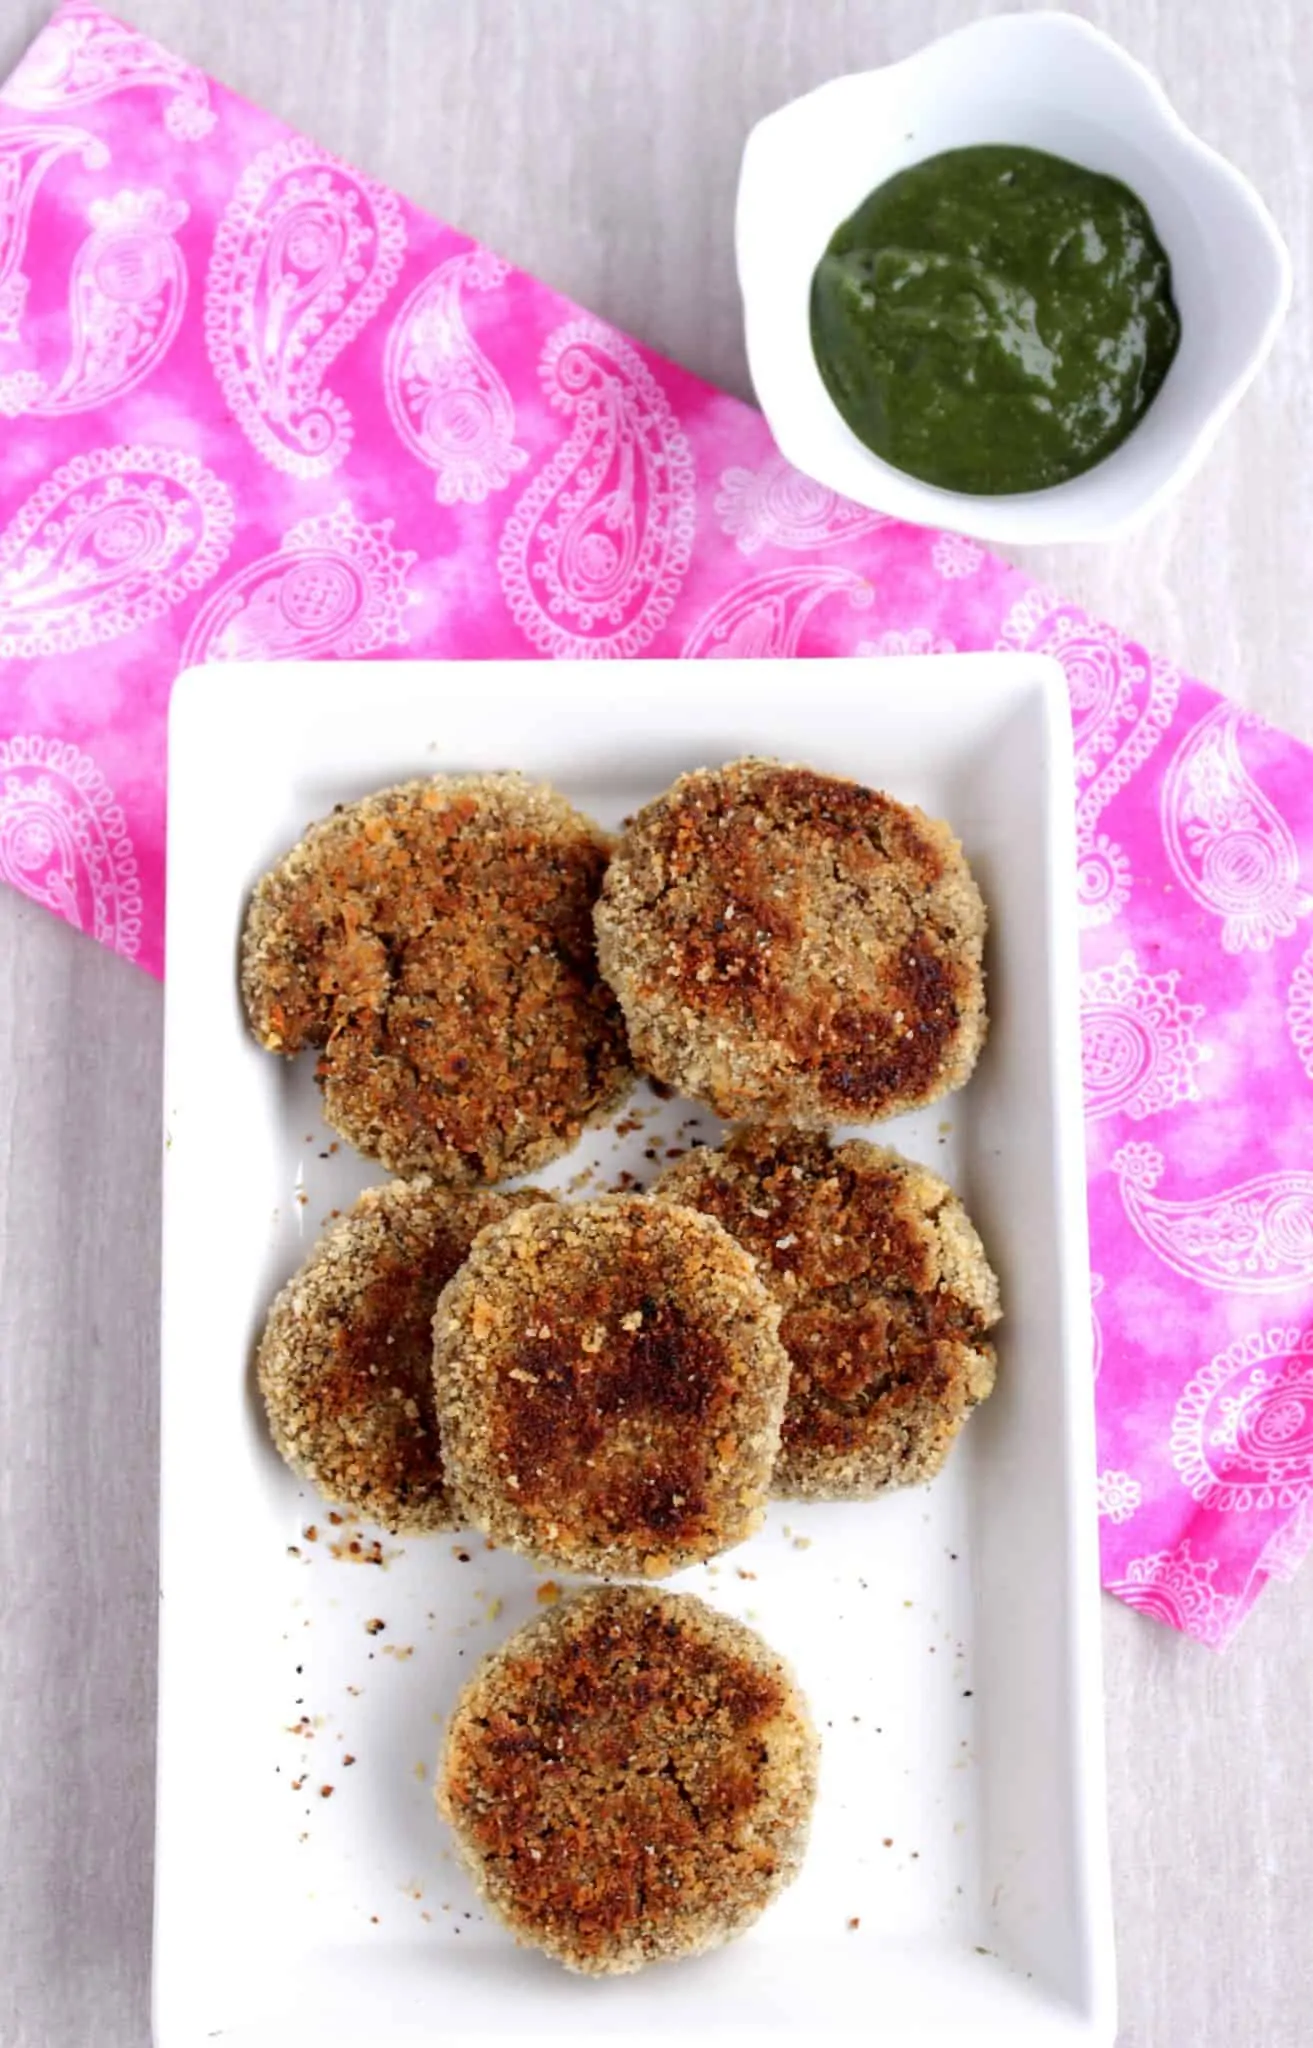 Baked Quinoa Vegetable Cutlet  served with chutney